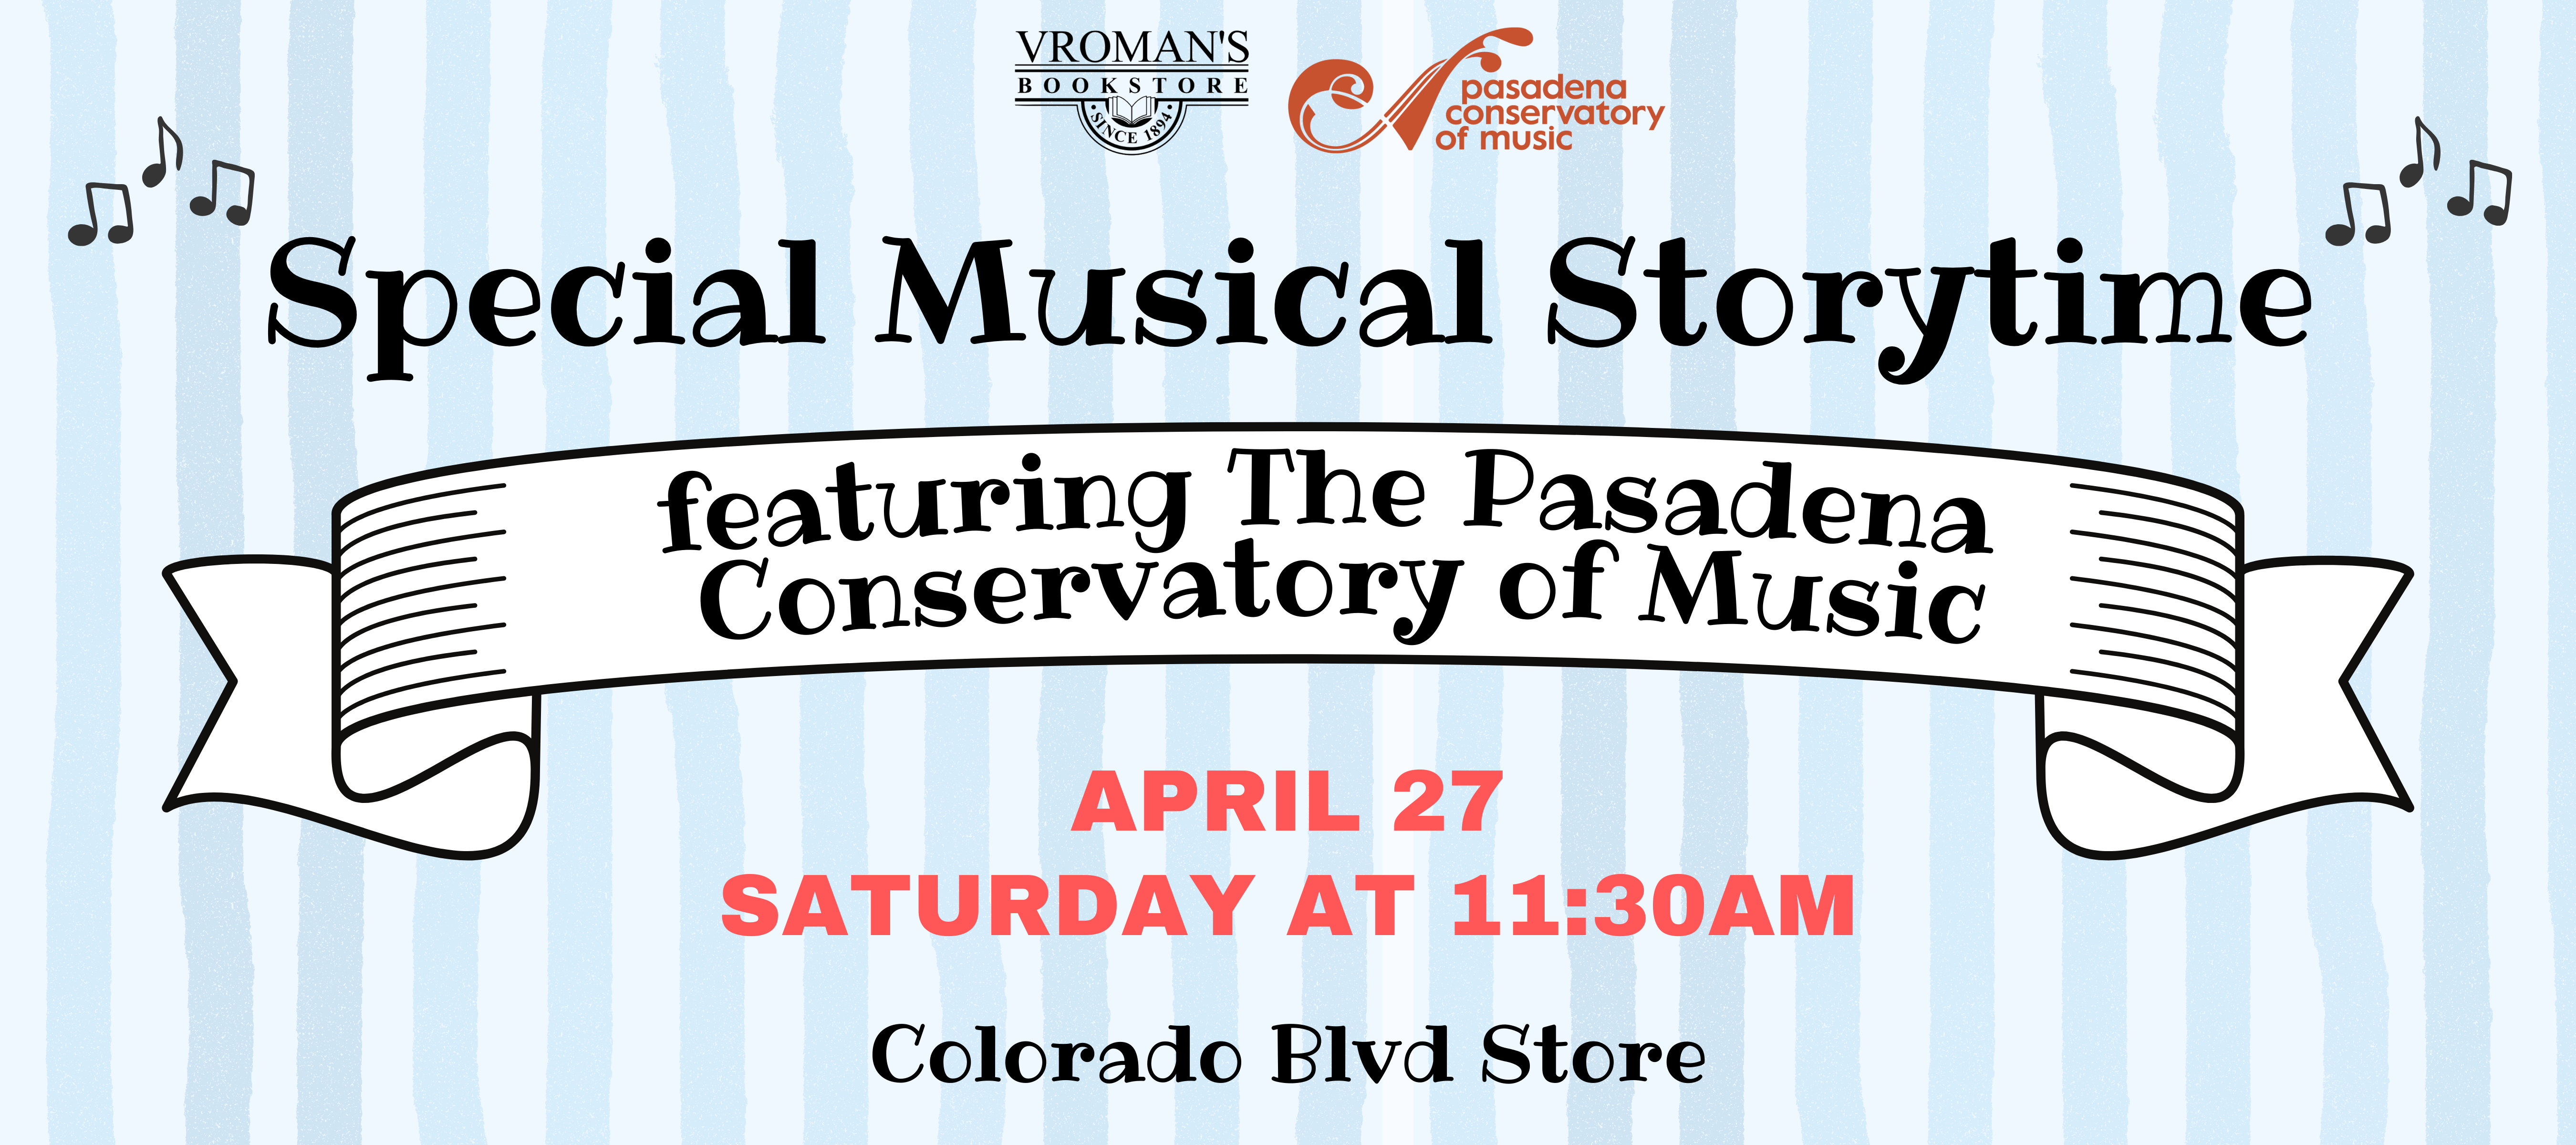 Special Musical Storytime